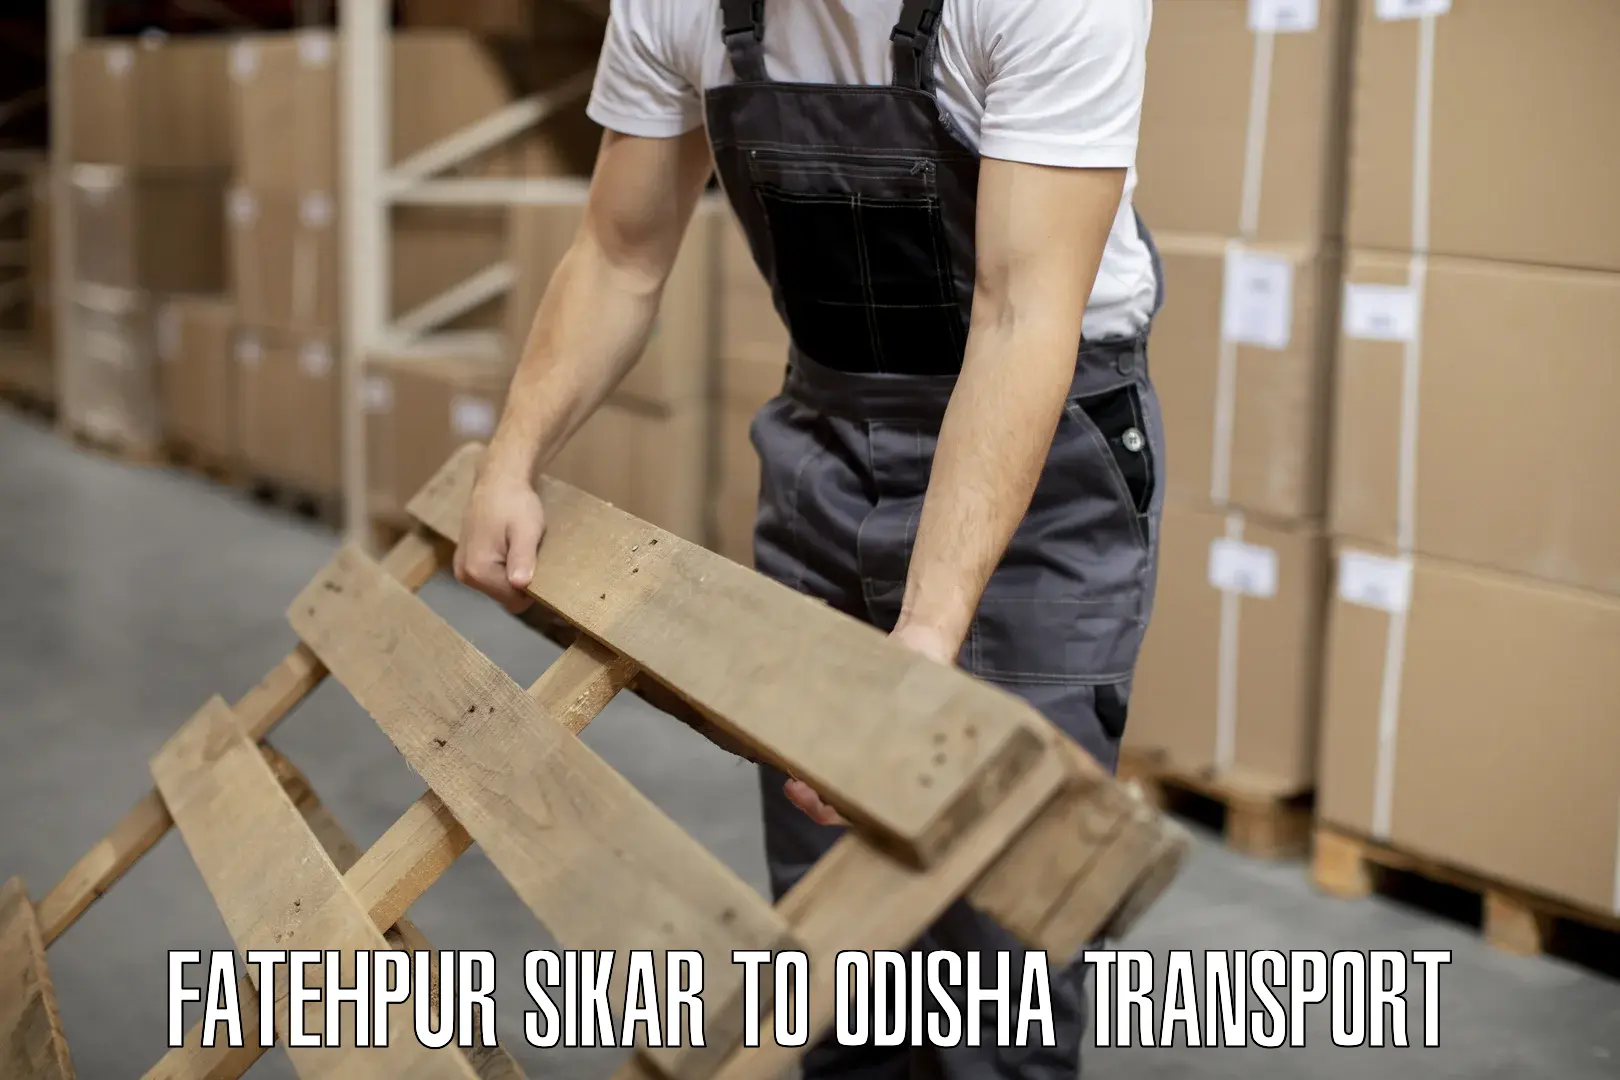 Commercial transport service Fatehpur Sikar to Dhenkanal